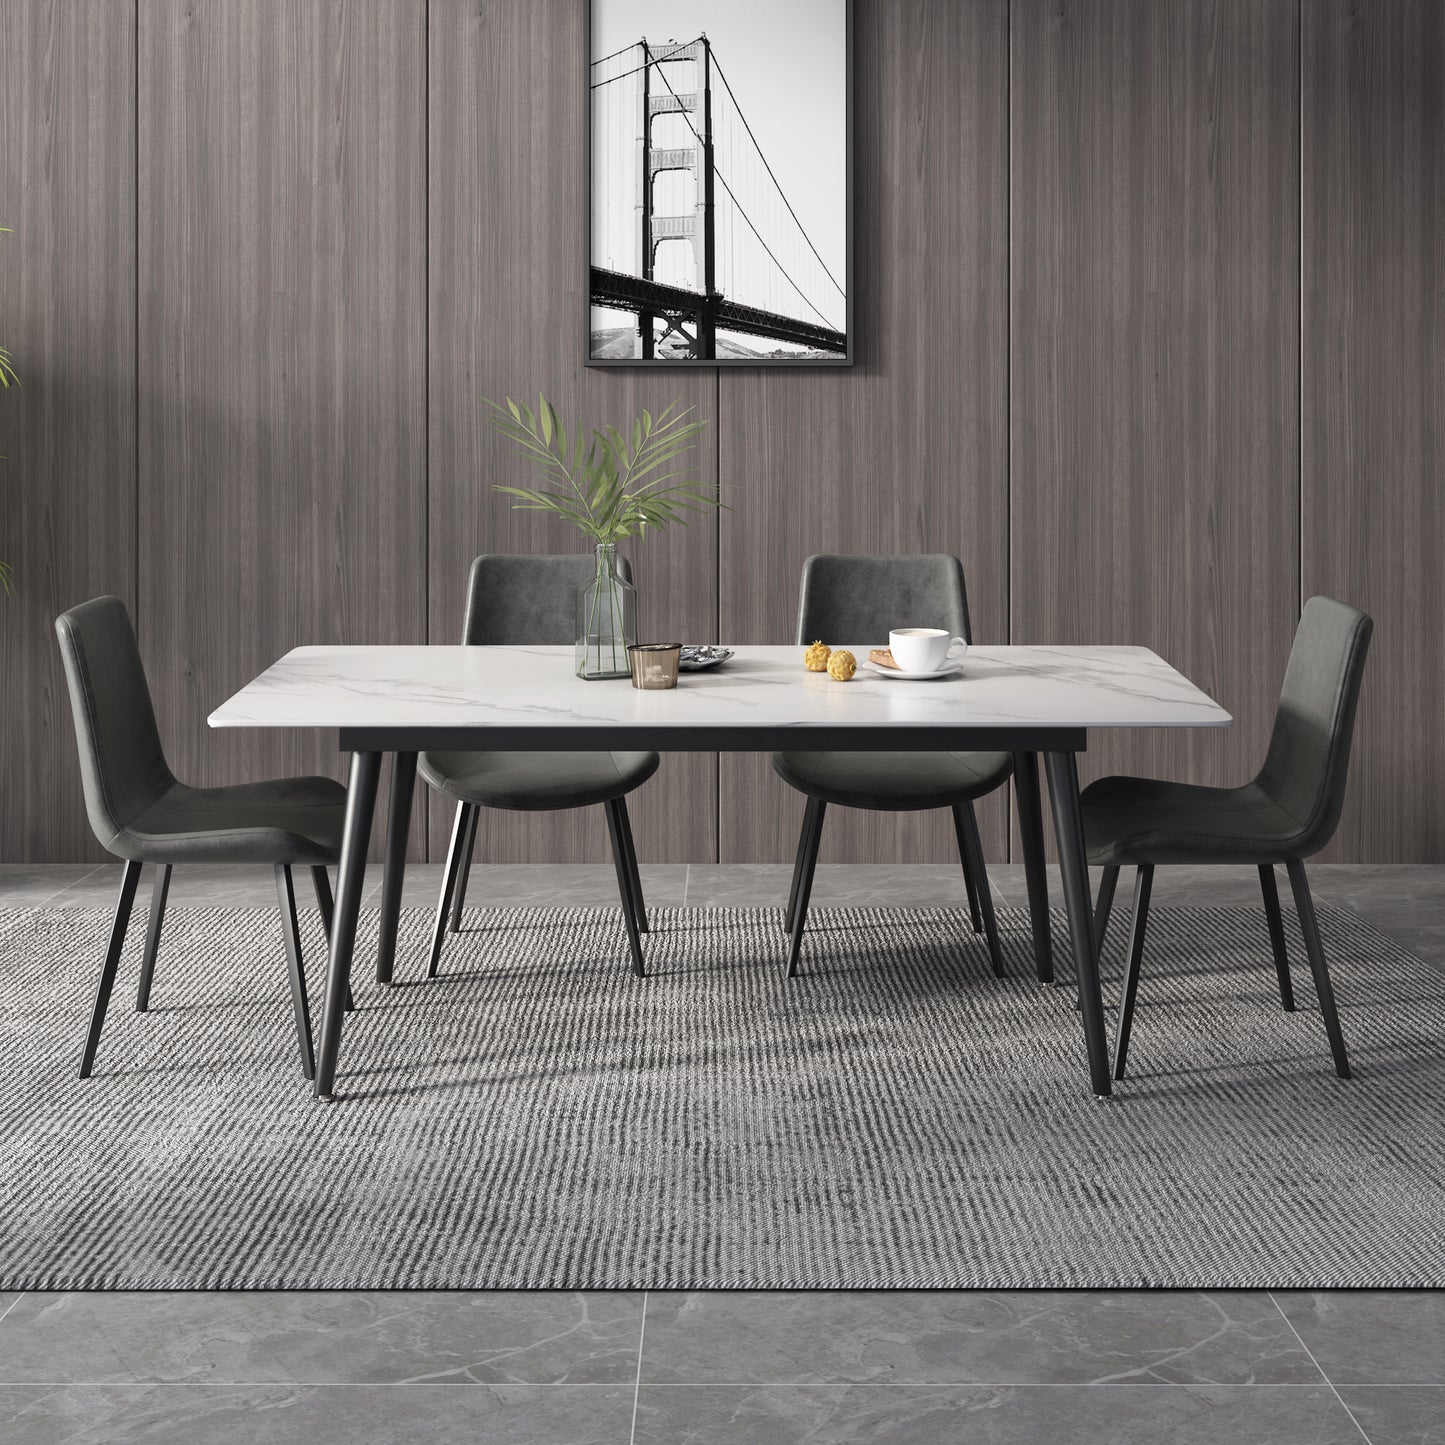 Modern Sintered Rectangle Dining Table Set with White Stone Top 6 Persons 4 Legs